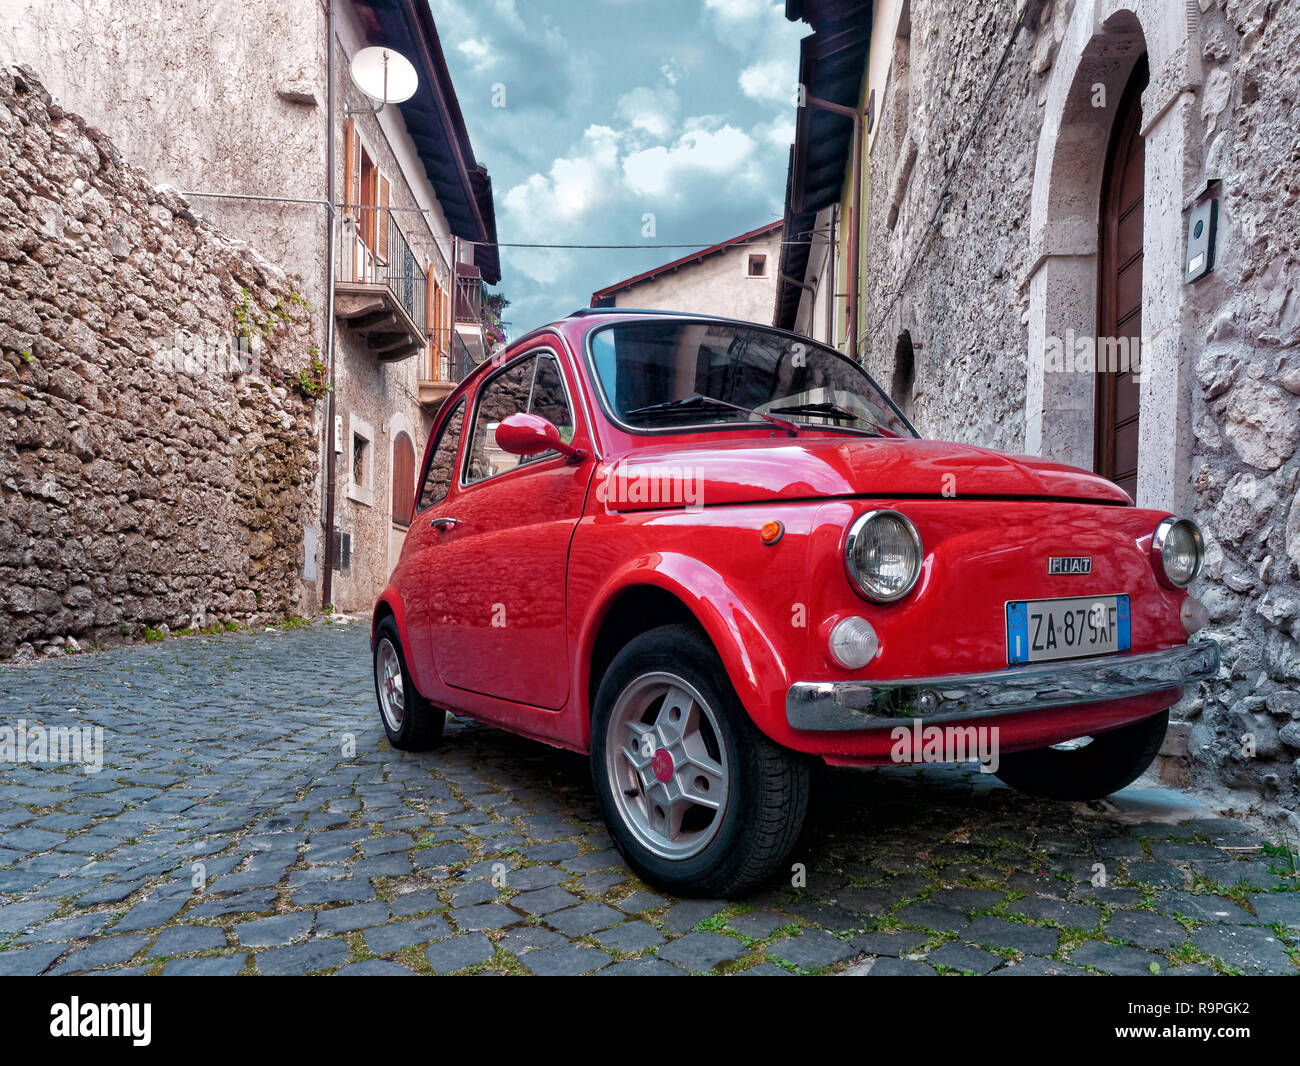 Pescasseroli, Italy - 2017 august: Red vintage city car fiat 500 parked in old village Stock Photo